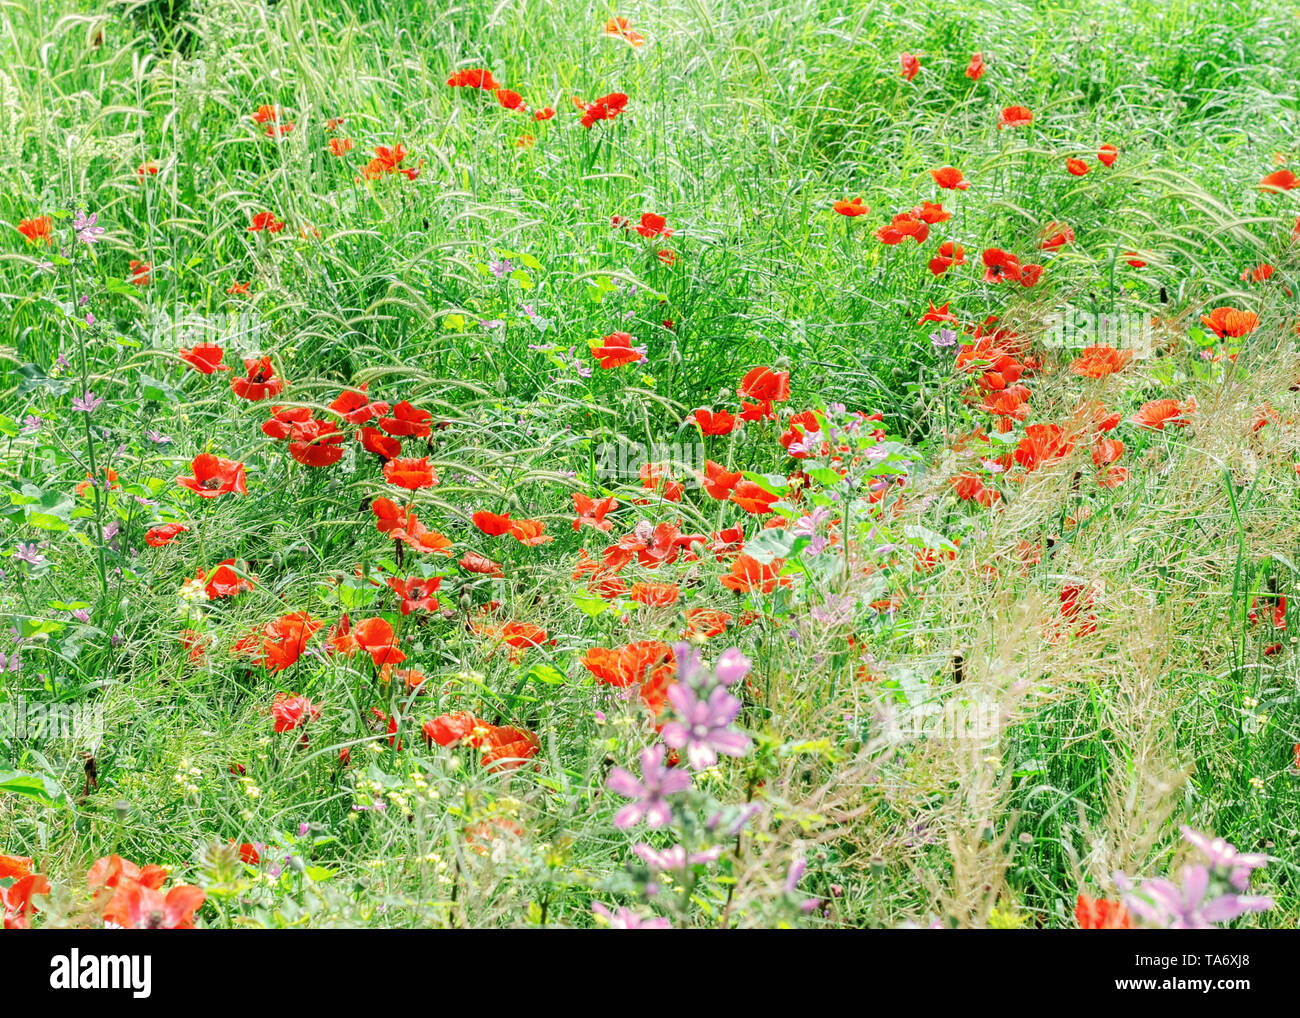 Pretty poppies in green grass on a sunny day Stock Photo